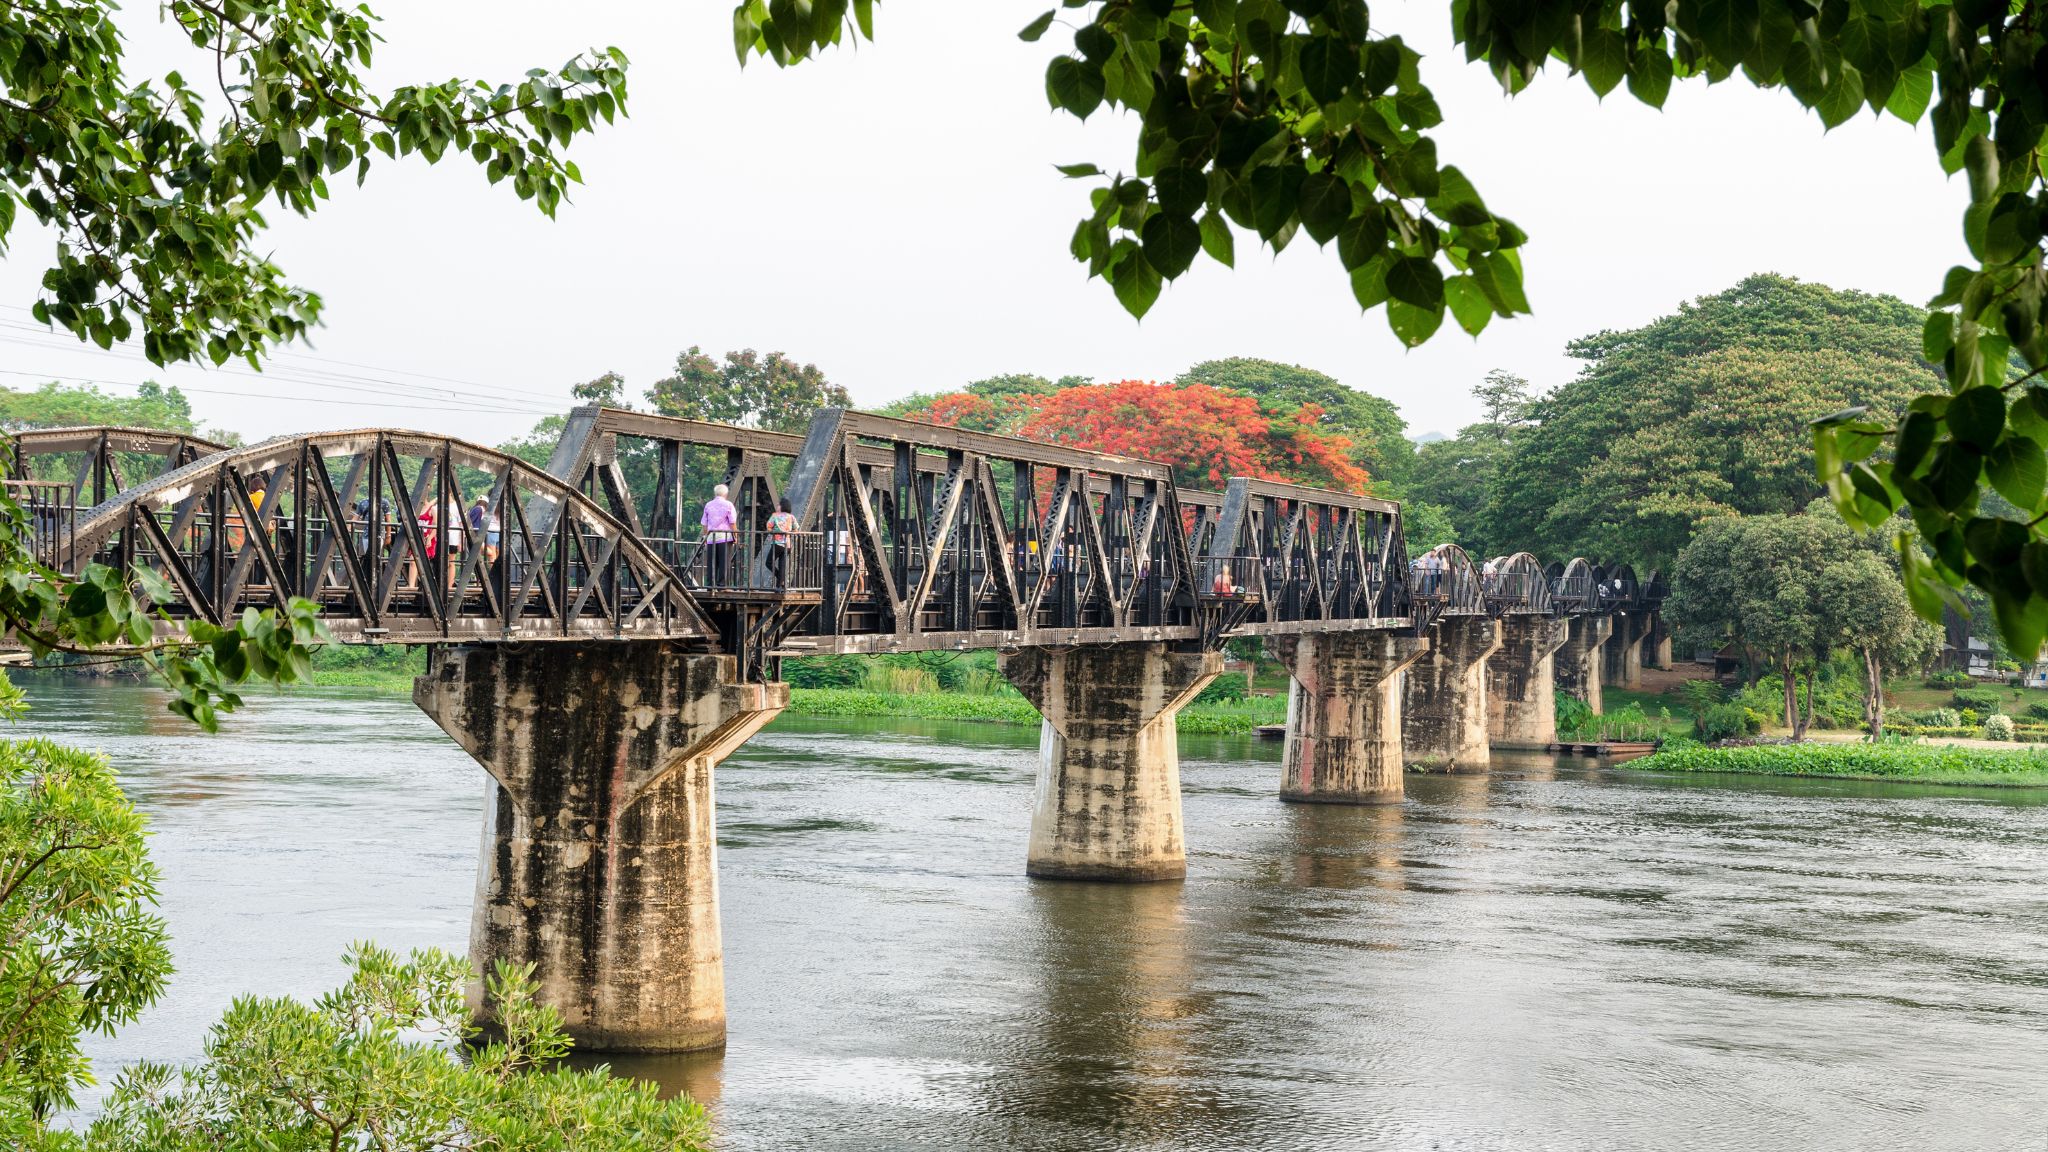 Day 3 Visit The Historical Bridge Over The River Kwai